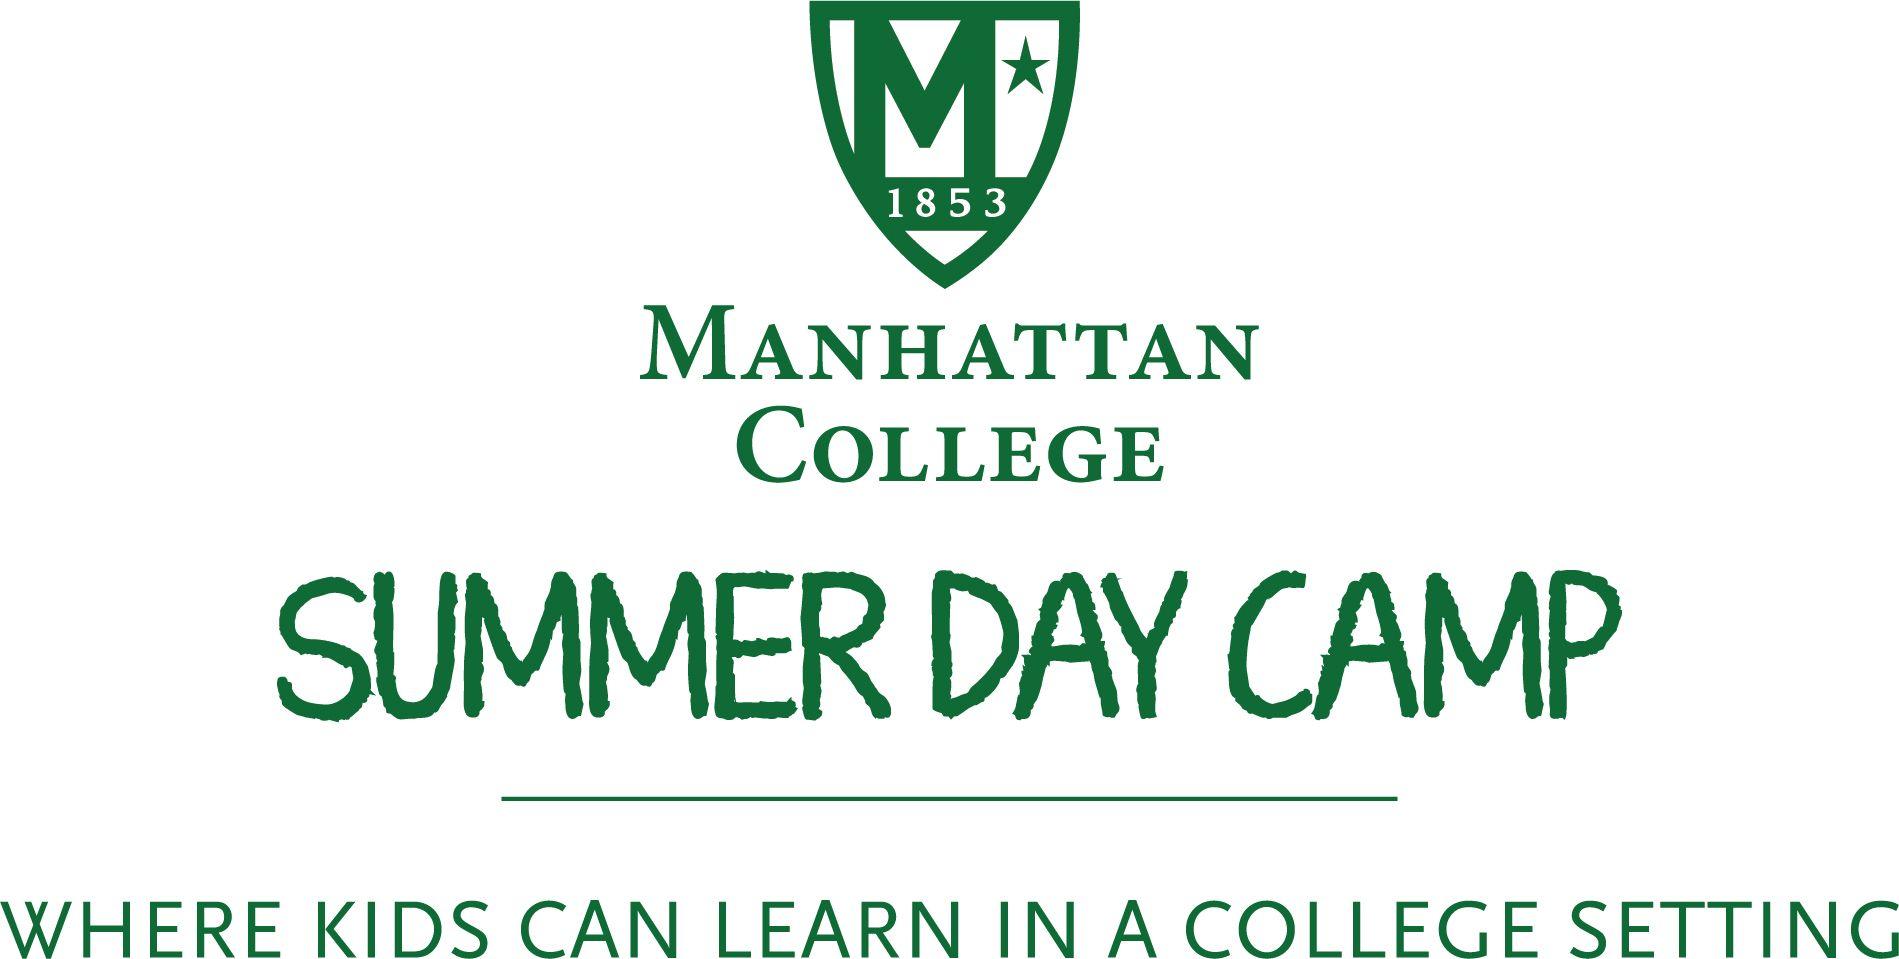 Summer Day Camp Logo - New Summer Day Camp Open To Kids Ages 6 14. Manhattan College